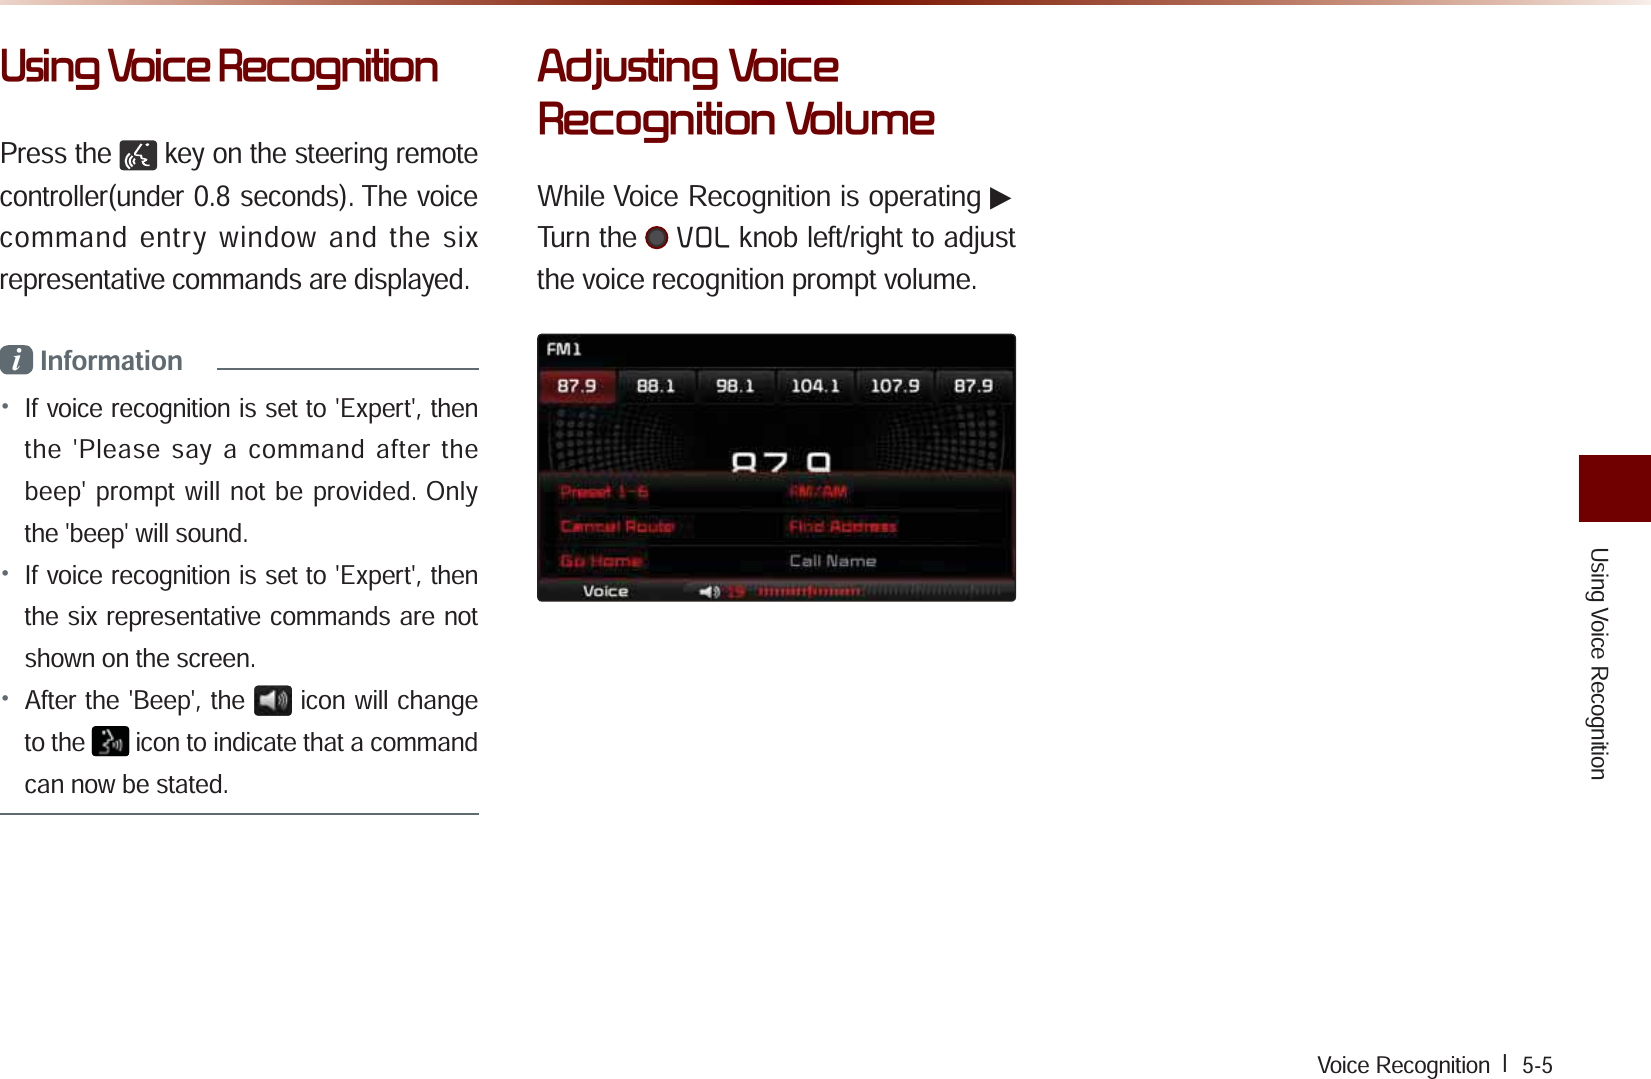 Using Voice RecognitionVoice Recognition l  5-58VLQJ9RLFH5HFRJQLWLRQPress the   key on the steering remote controller(under 0.8 seconds). The voice command entry window and the six representative commands are displayed.i Information• If voice recognition is set to &apos;Expert&apos;, then the &apos;Please say a command after the beep&apos; prompt will not be provided. Only the &apos;beep&apos; will sound.• If voice recognition is set to &apos;Expert&apos;, then the six representative commands are not shown on the screen. • After the &apos;Beep&apos;, the icon will change to the   icon to indicate that a command can now be stated.$GMXVWLQJ9RLFH5HFRJQLWLRQ9ROXPHWhile Voice Recognition is operating ▶Turn the 92/ knob left/right to adjust the voice recognition prompt volume.